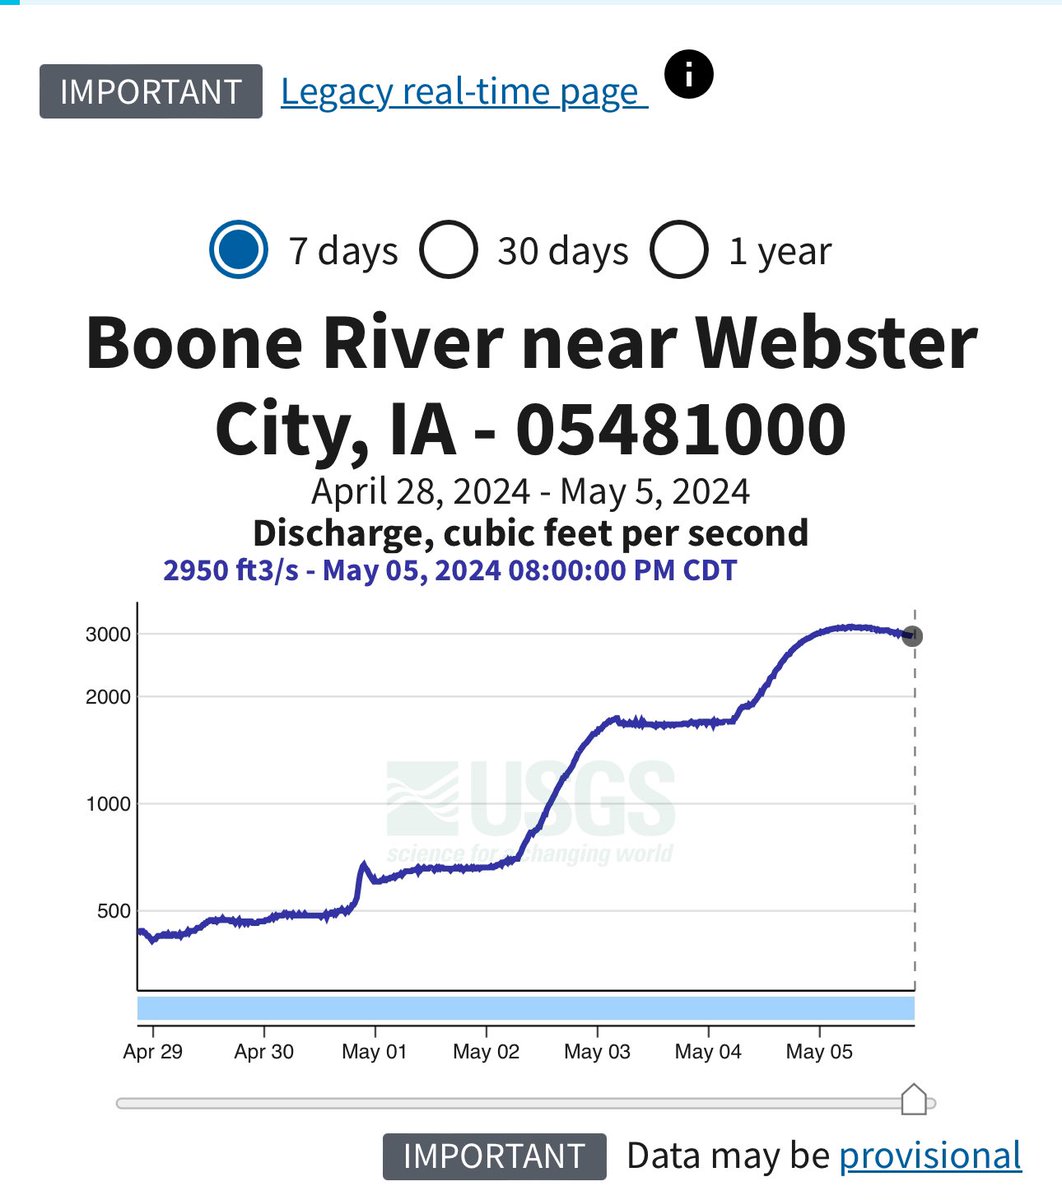 If folks would like to do the math on N load, the USGS gauge has flow in the Boone at Webster City at 3000 cubic feet per second.